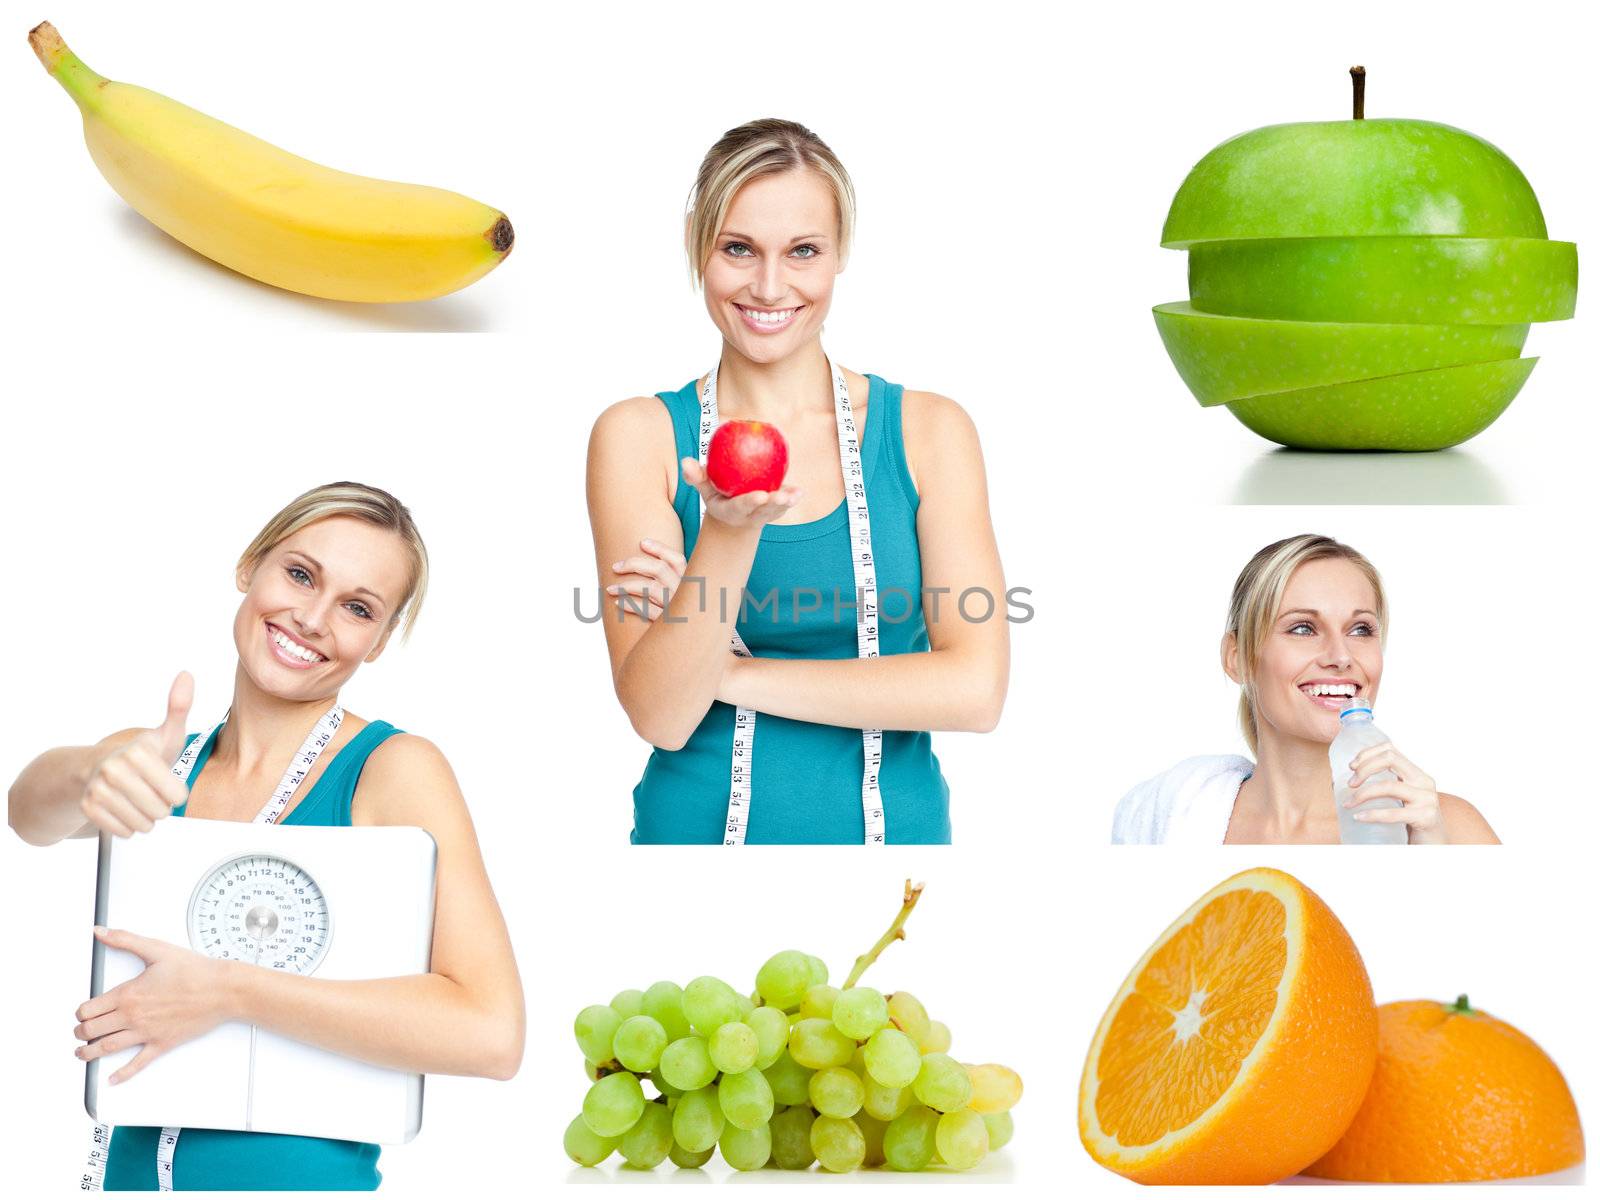 Collage about healthy lifestyle by Wavebreakmedia